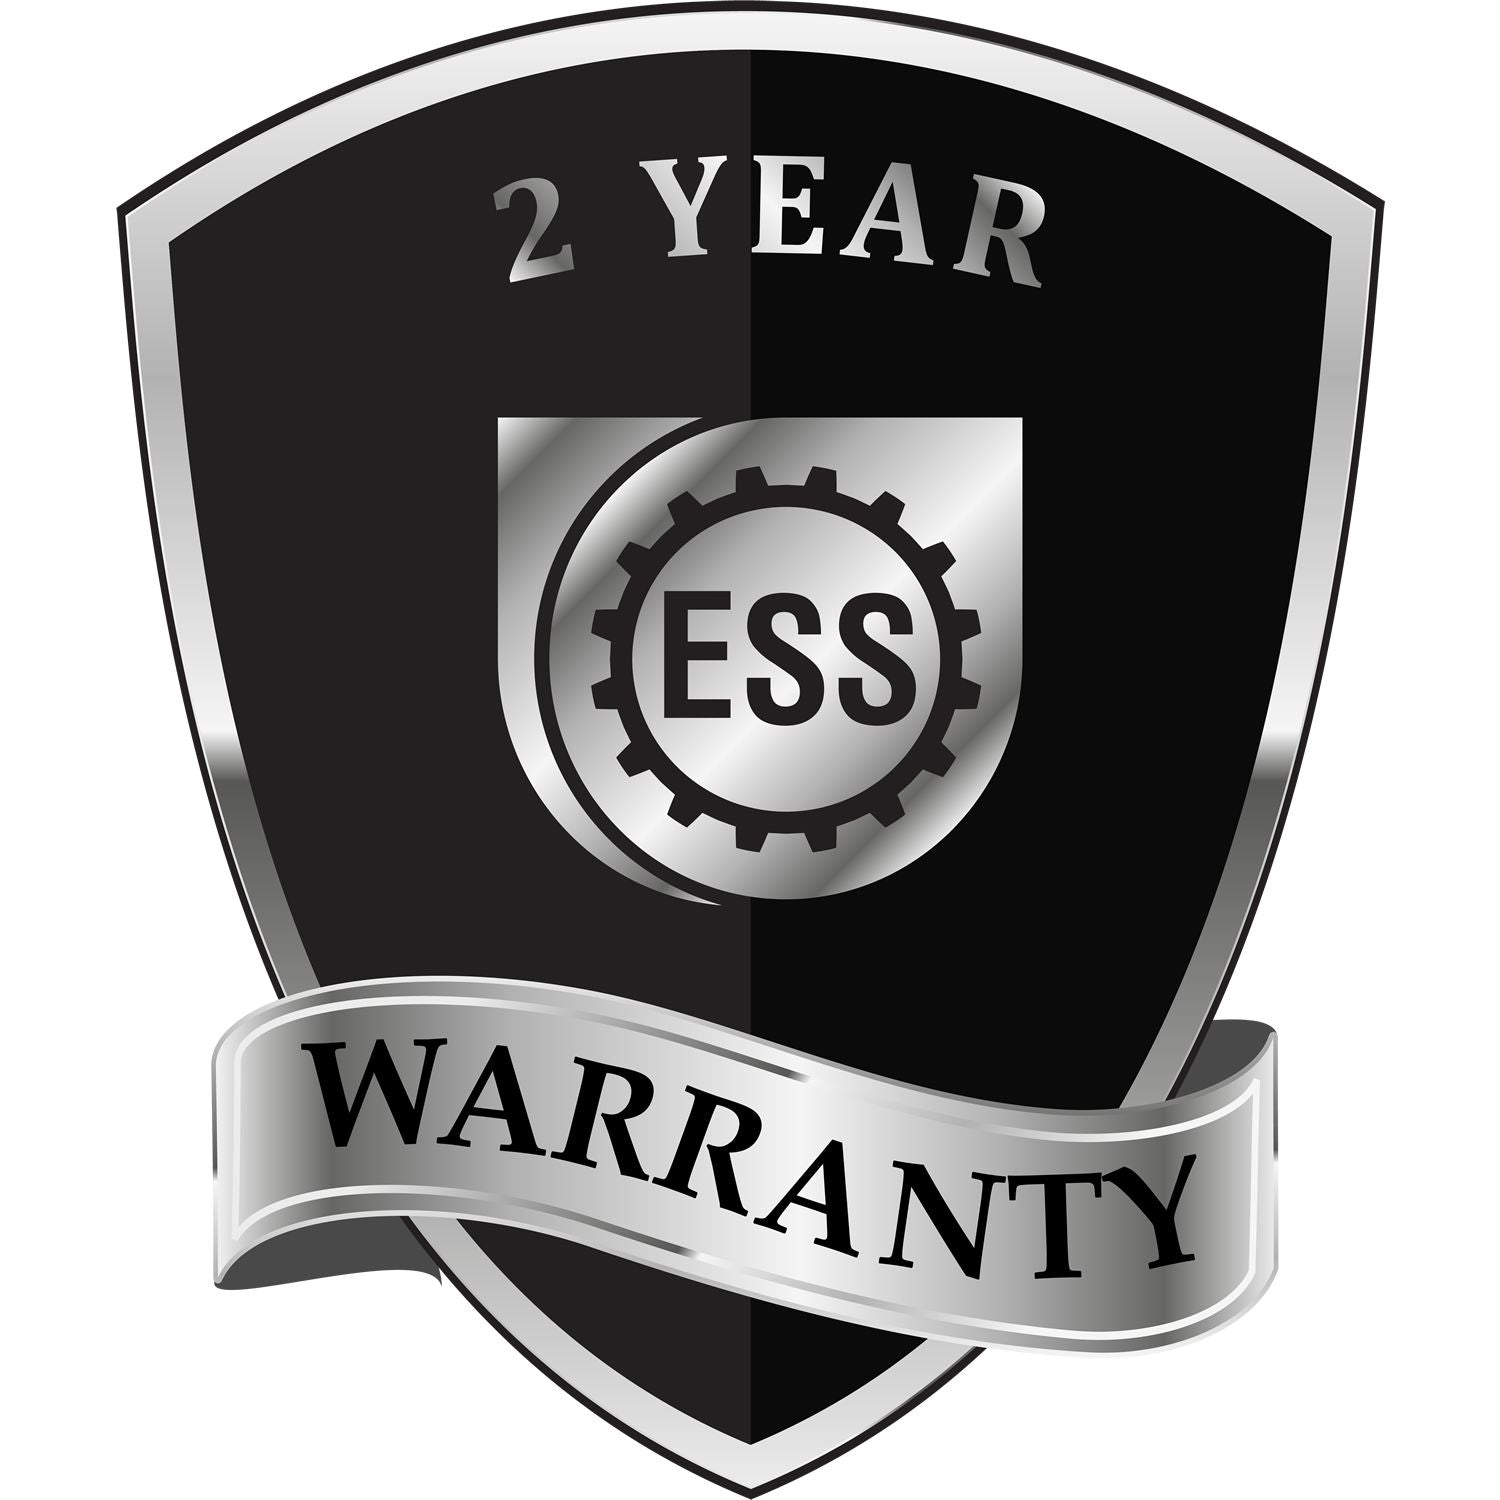 A badge or emblem showing a warranty icon for the Heavy Duty Cast Iron Tennessee Land Surveyor Seal Embosser